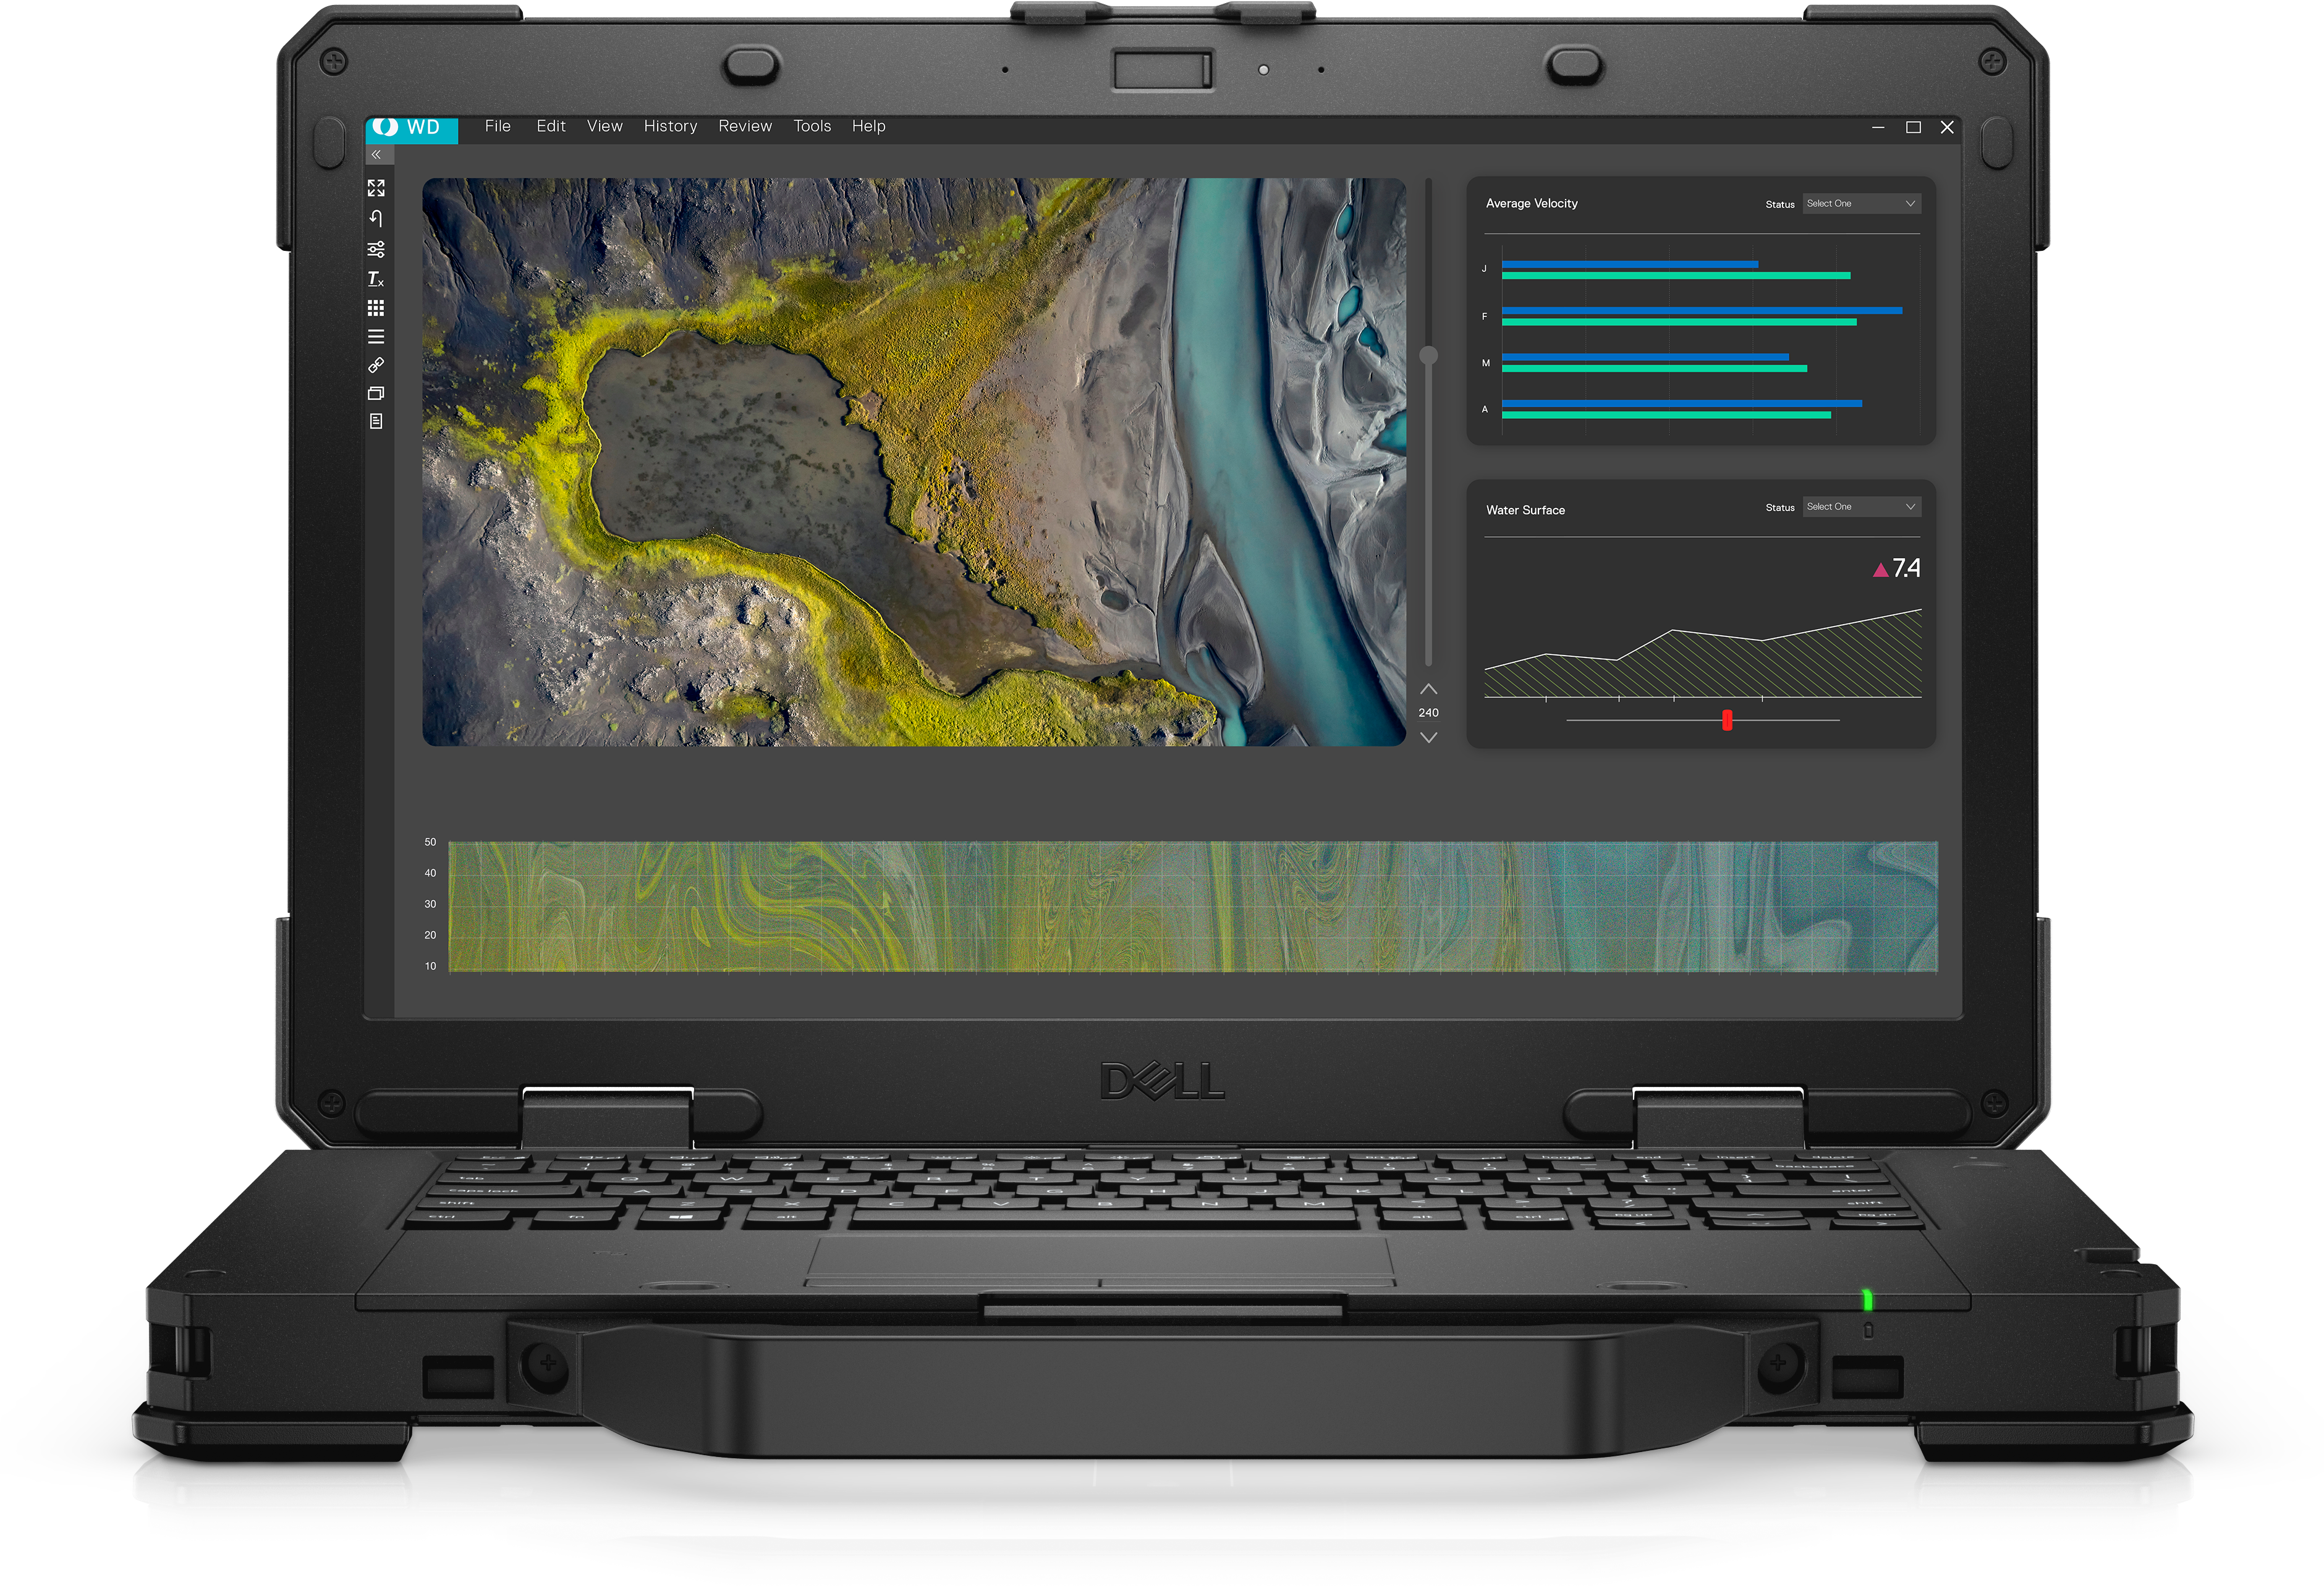 yDellzDell Latitude 5430 Rugged - Build Your Own